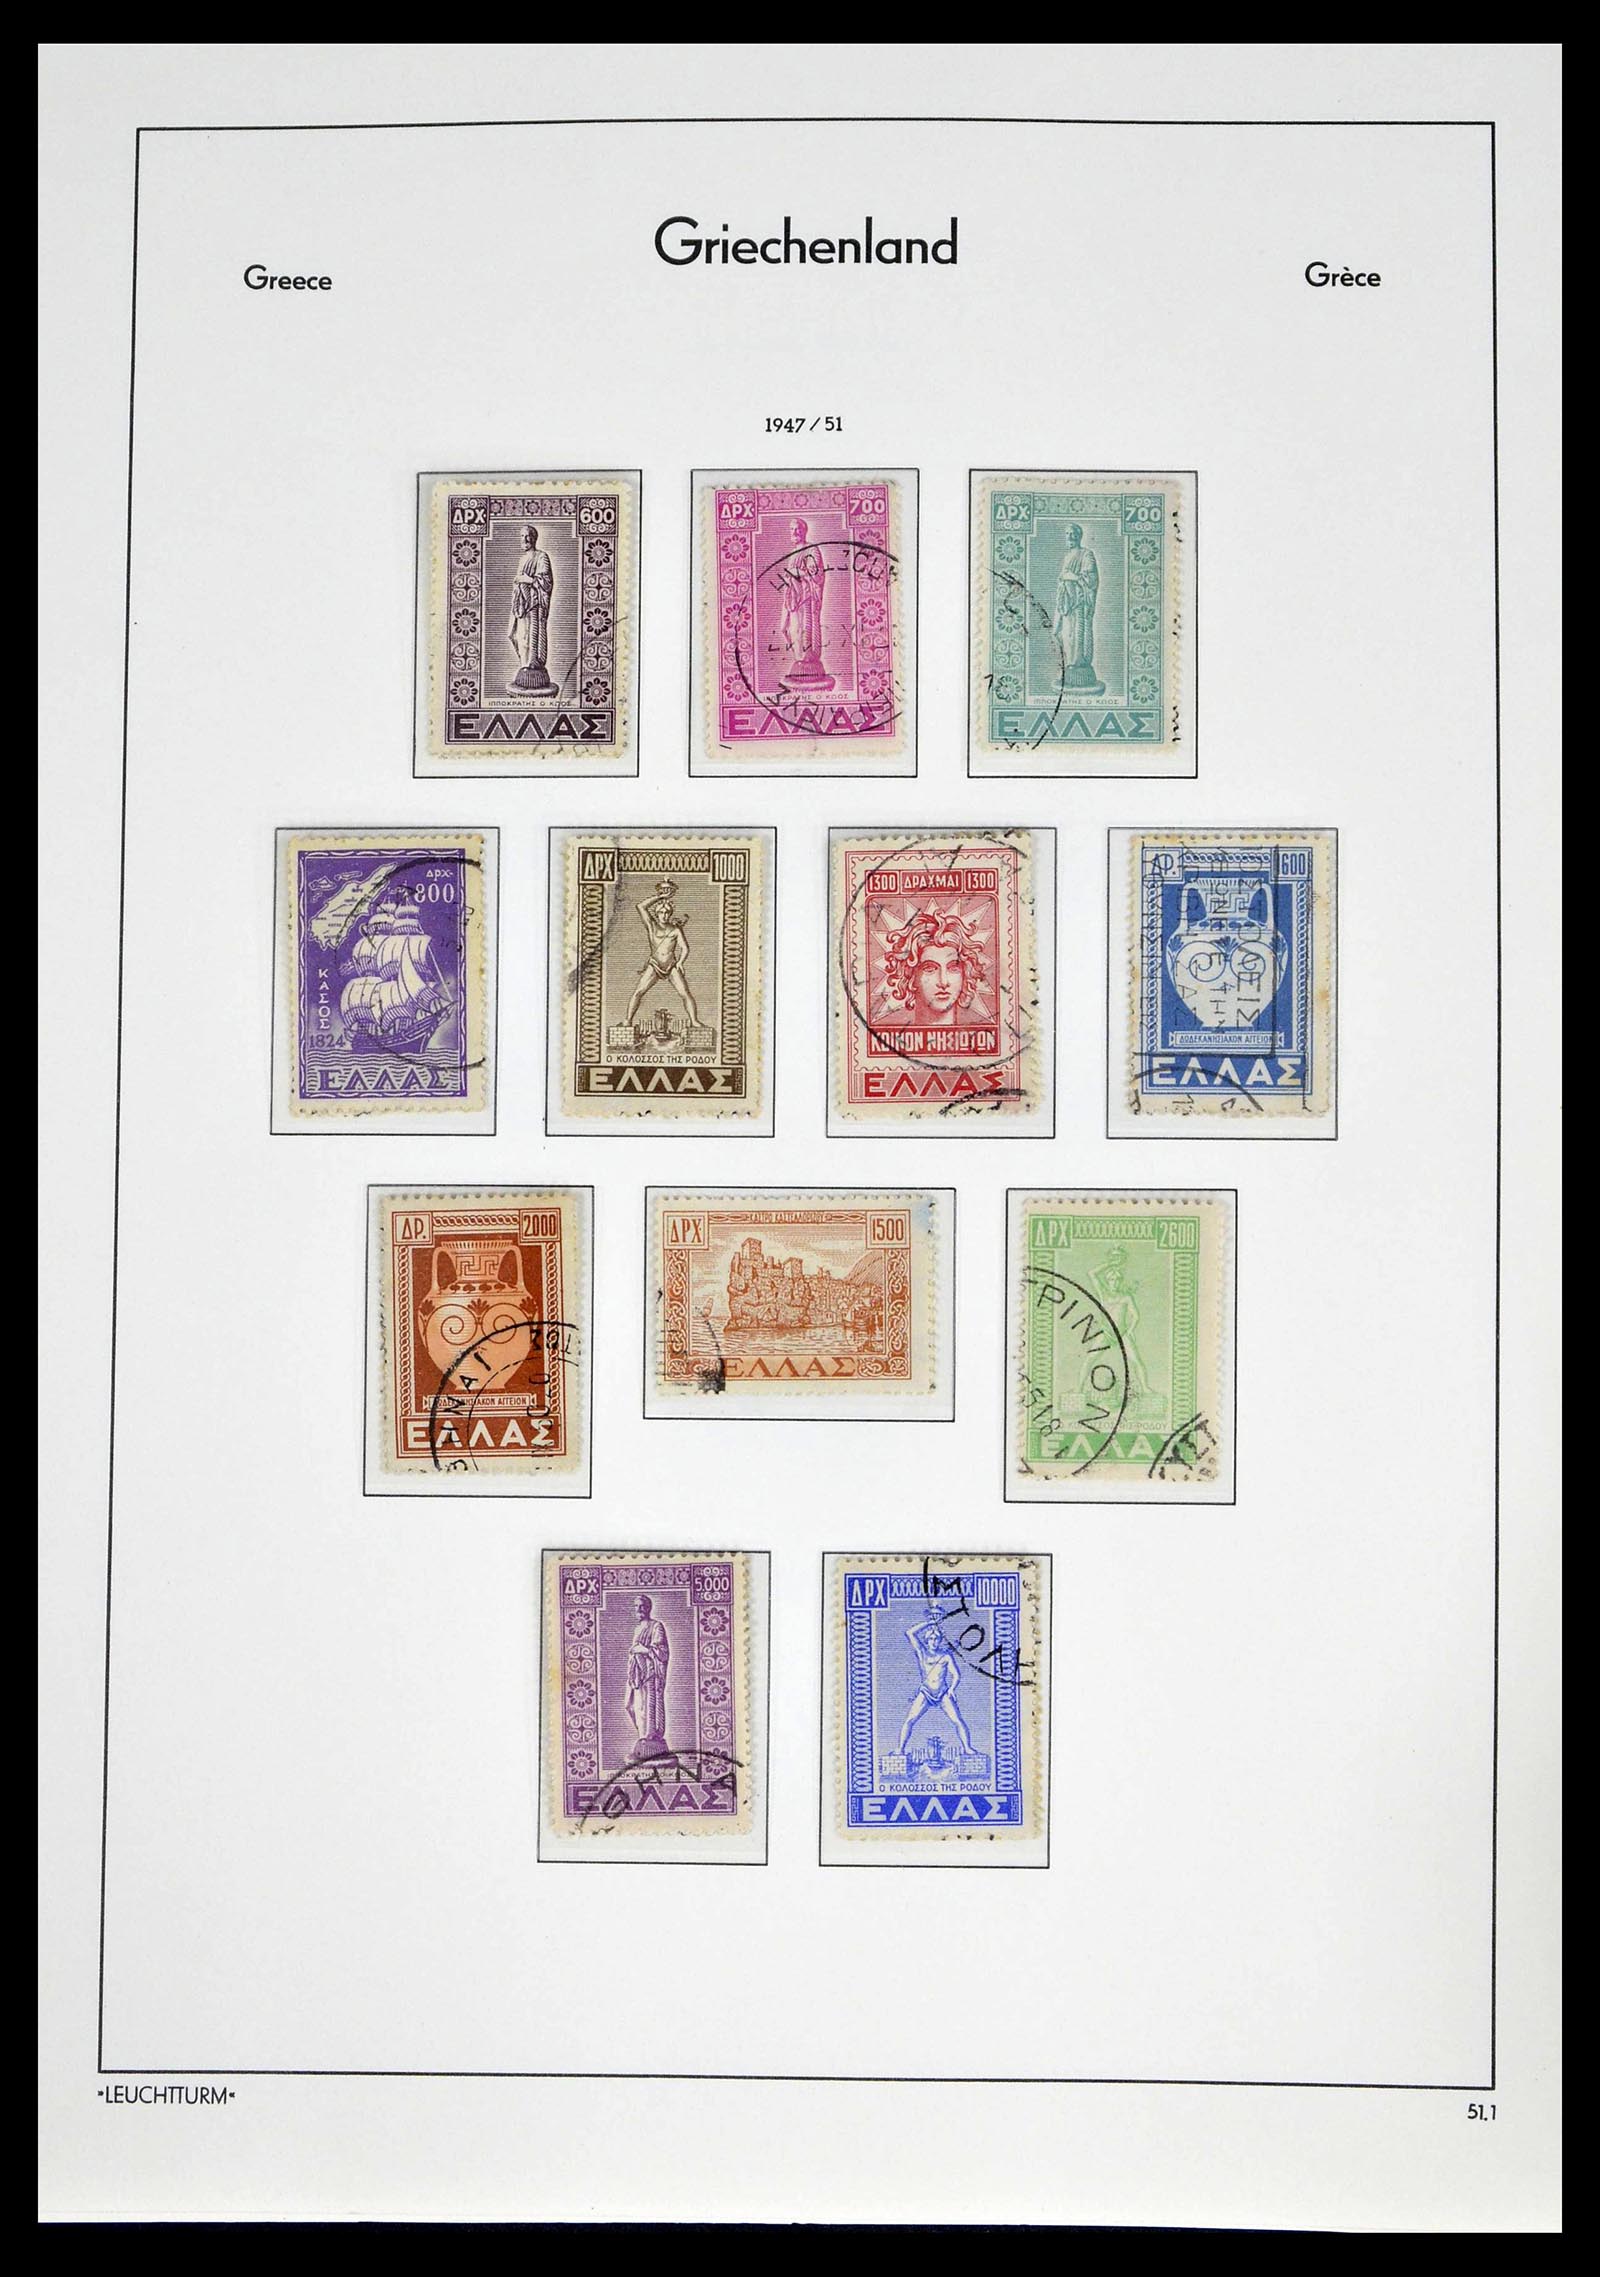 39243 0059 - Stamp collection 39243 Greece 1861-1965.